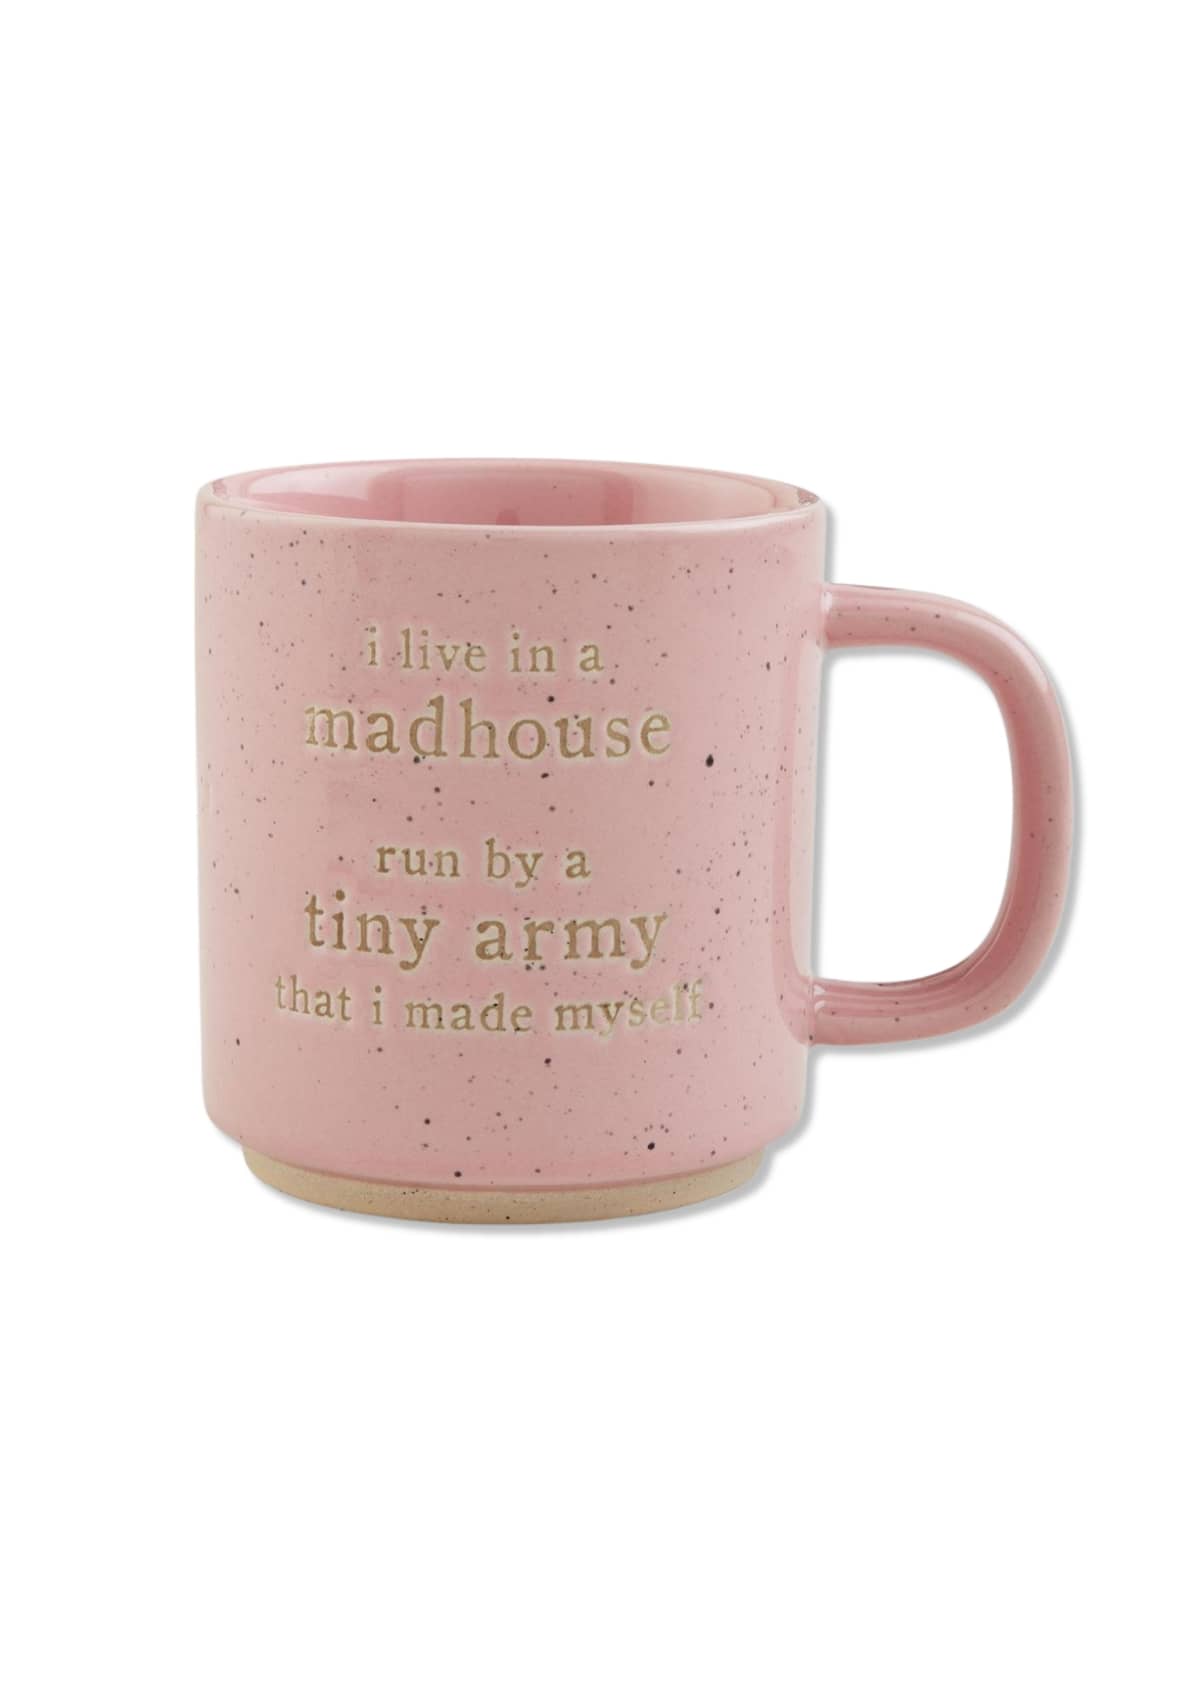 Drinkware-For The Gal Pals-For The Home-Ruby Jane.